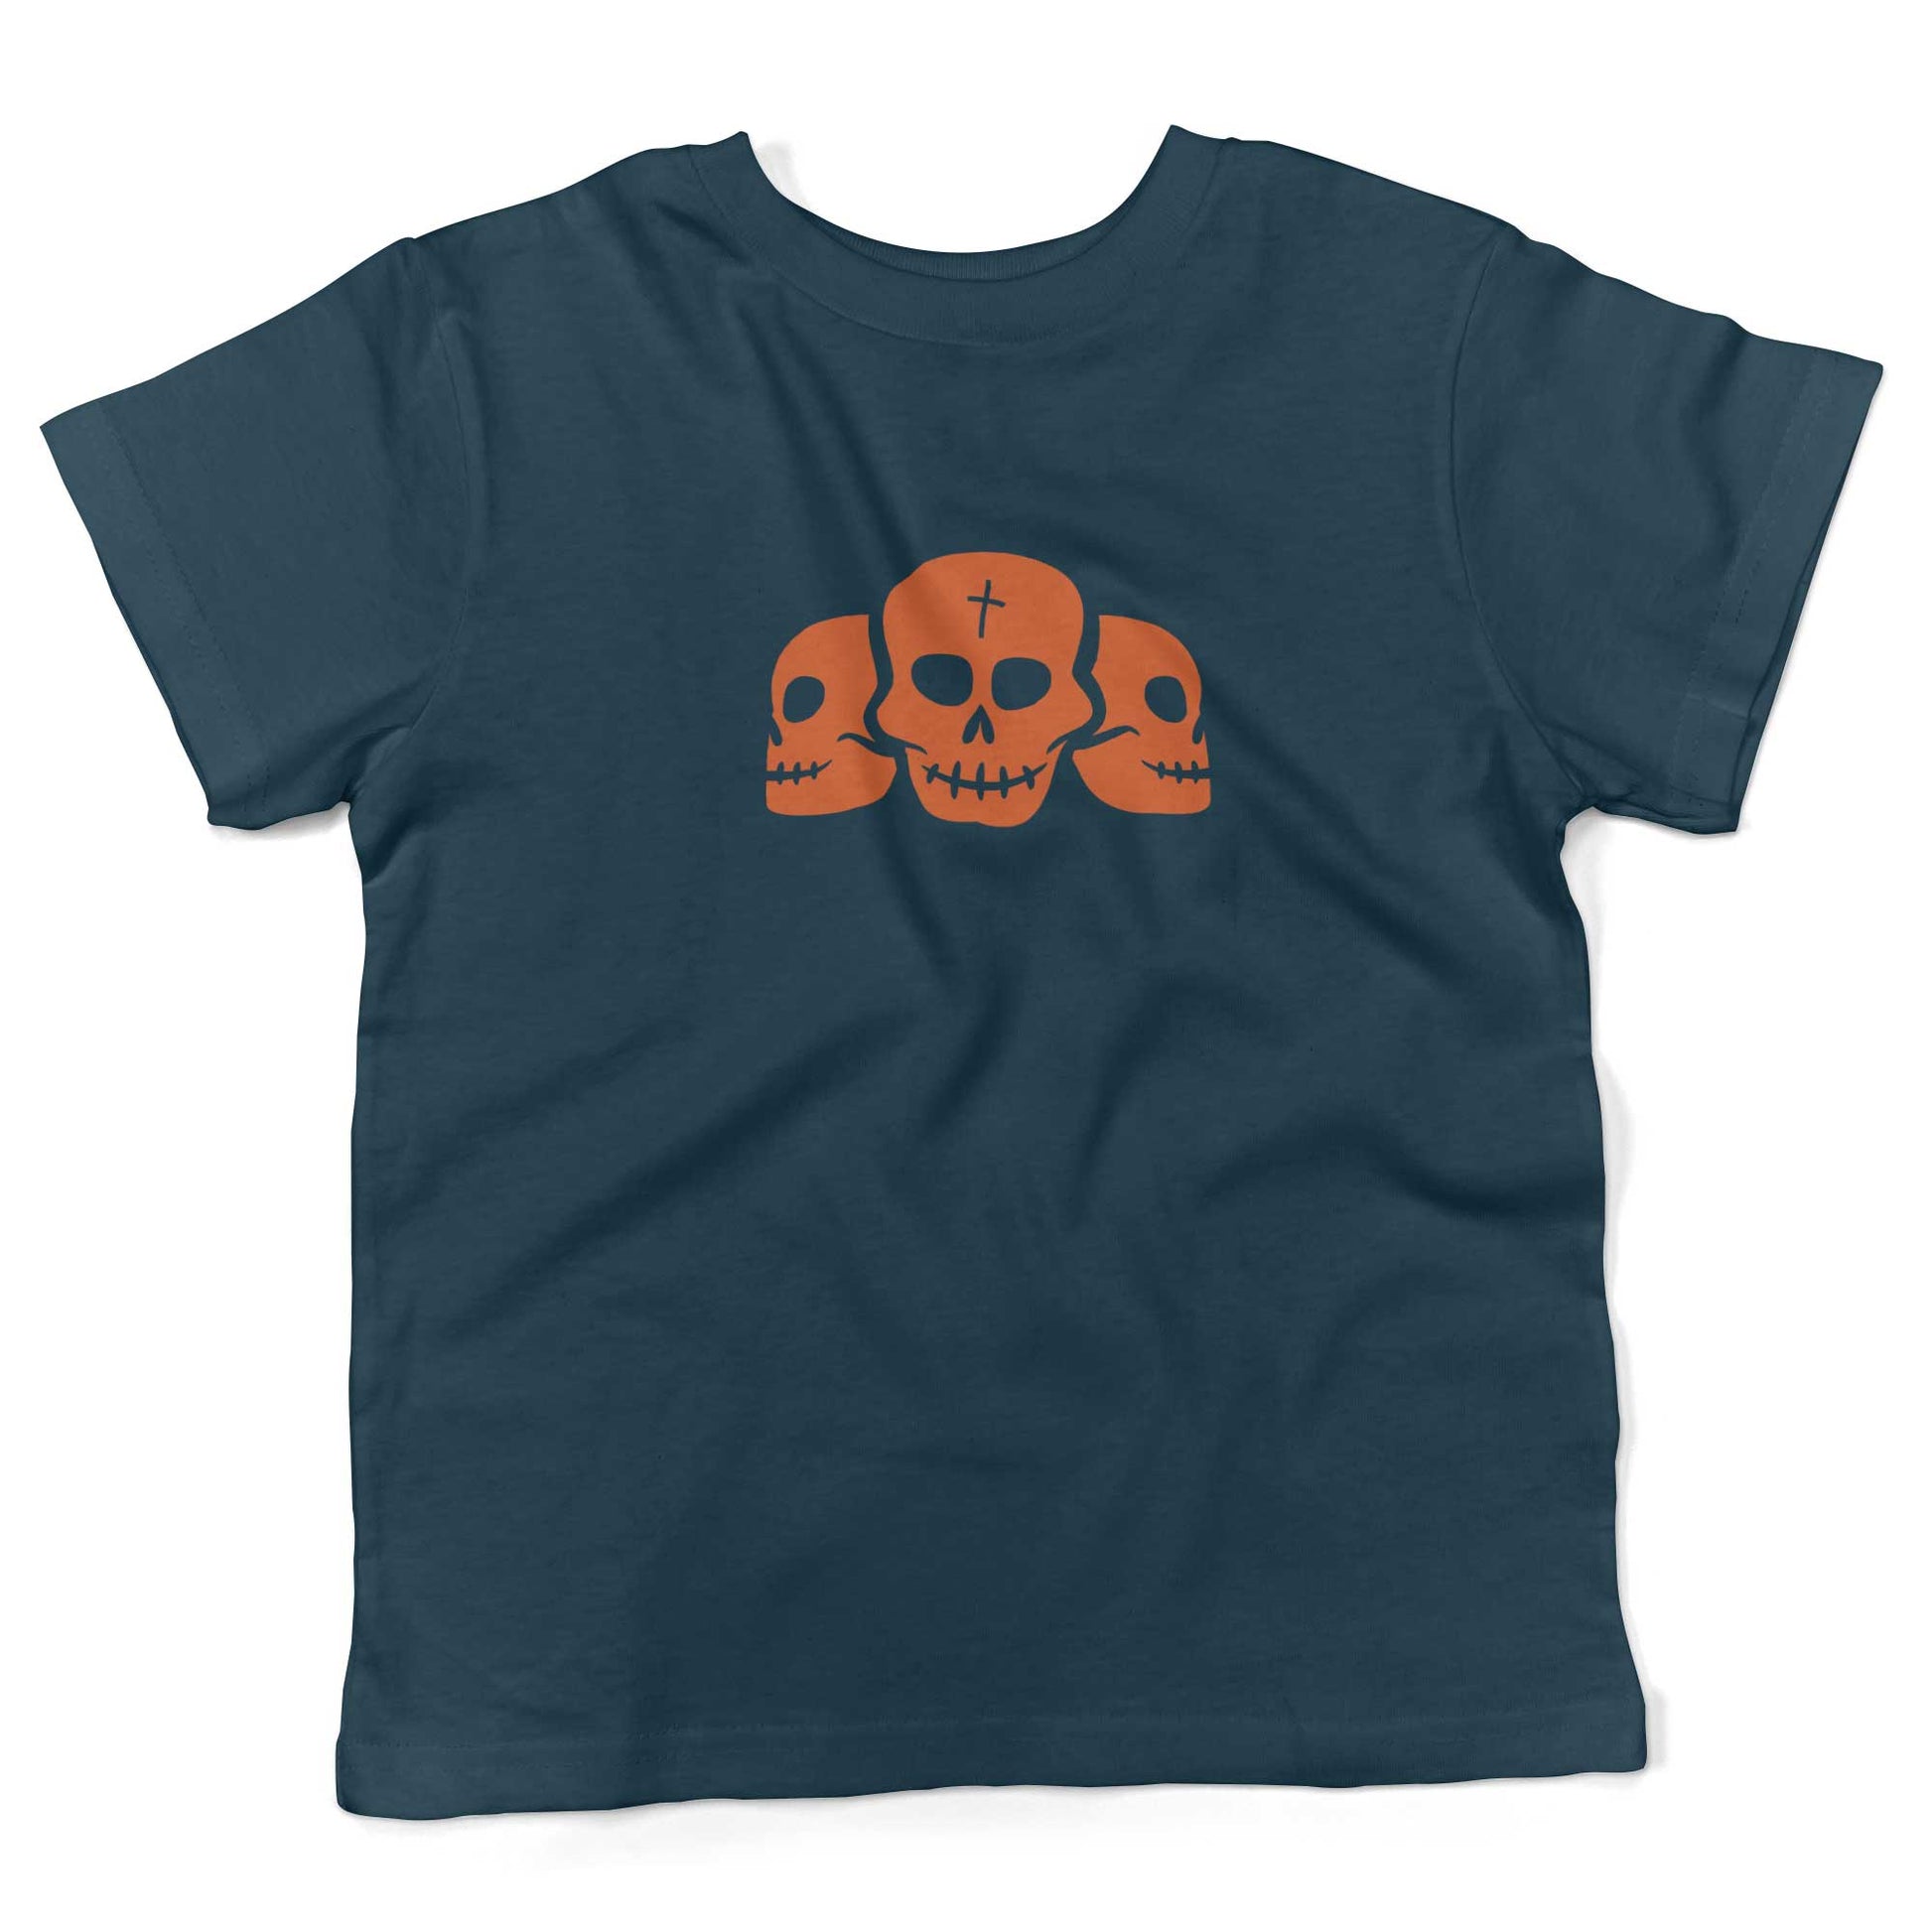 Day Of The Dead Skulls Toddler Shirt-Organic Pacific Blue-2T